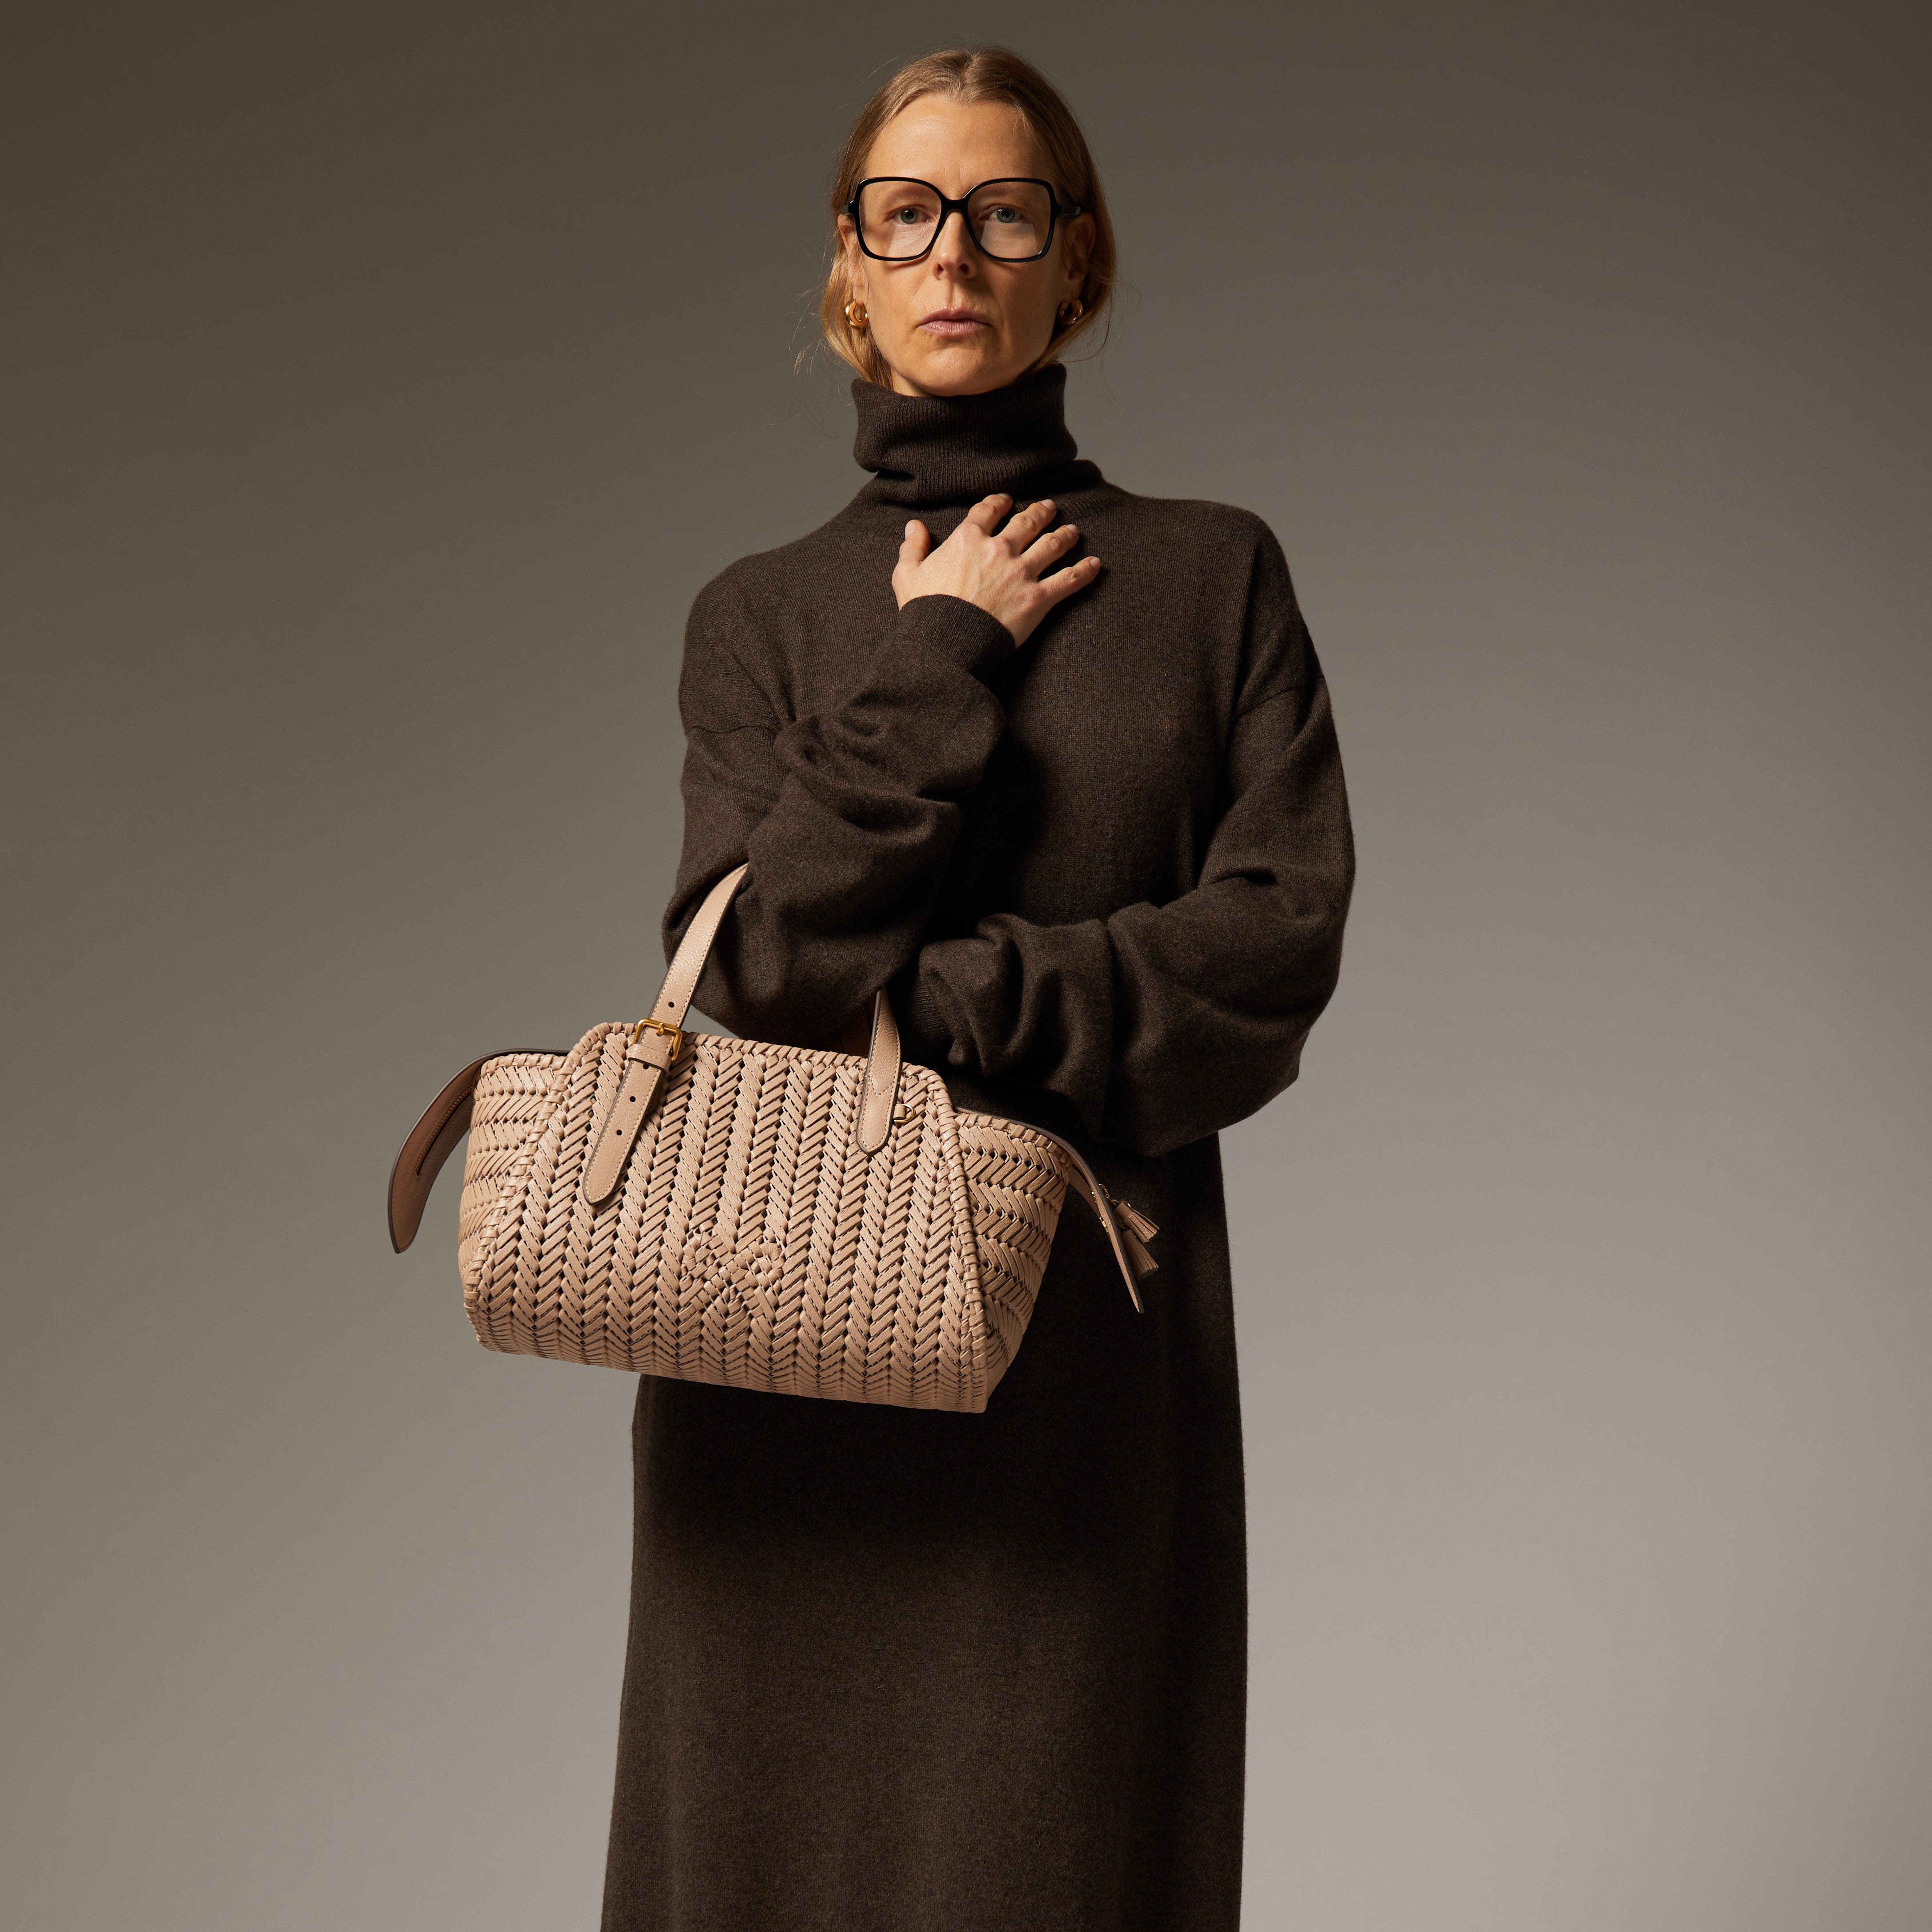 Cara Delevingne Mulberry Bag: See Her New Autumn/Winter 2015 Collection |  HuffPost UK Style